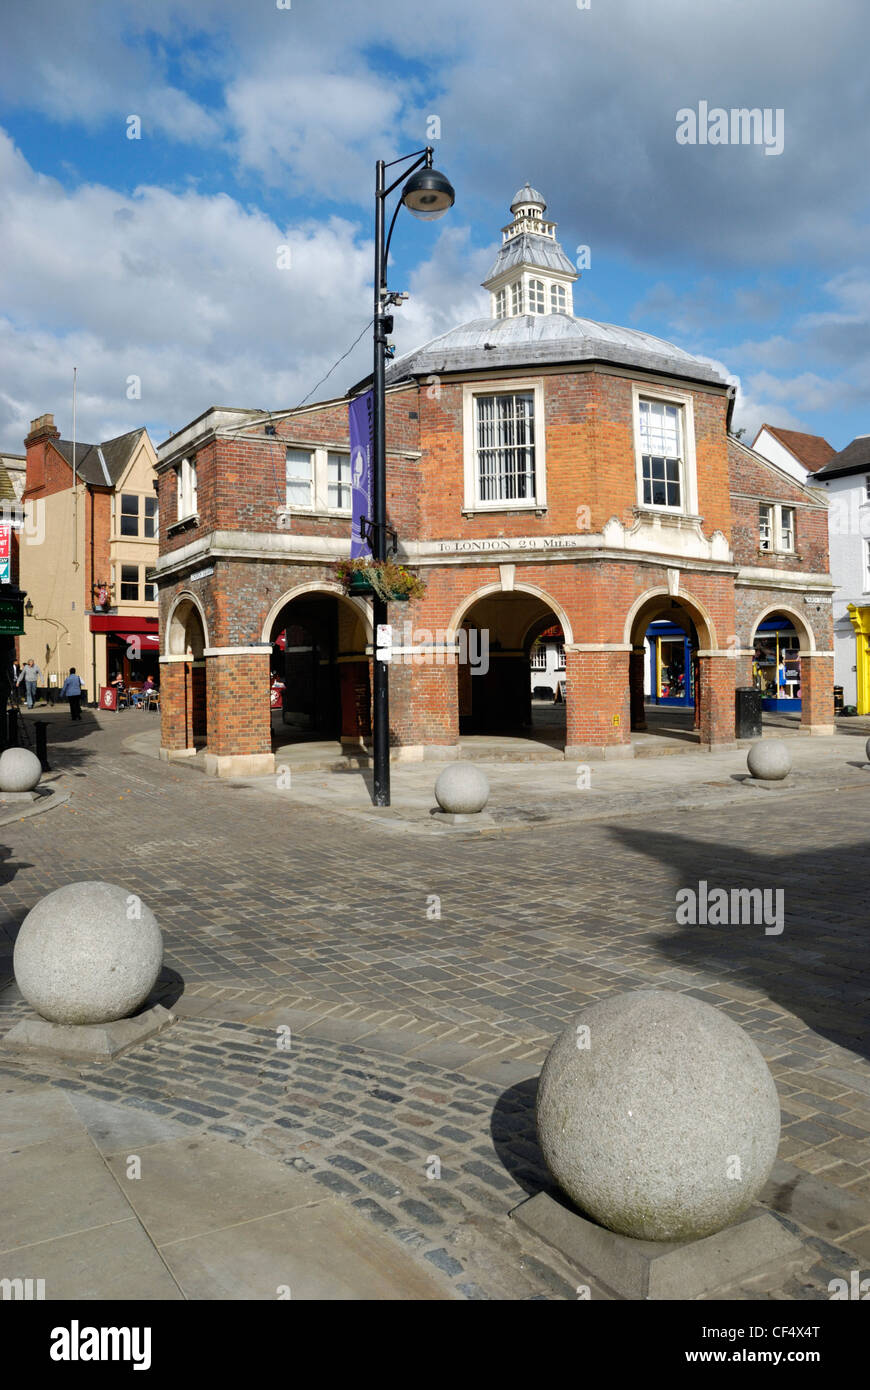 Church Square and the Little Market House. The Little Market house is also known locally as 'The Pepperpot'. Stock Photo